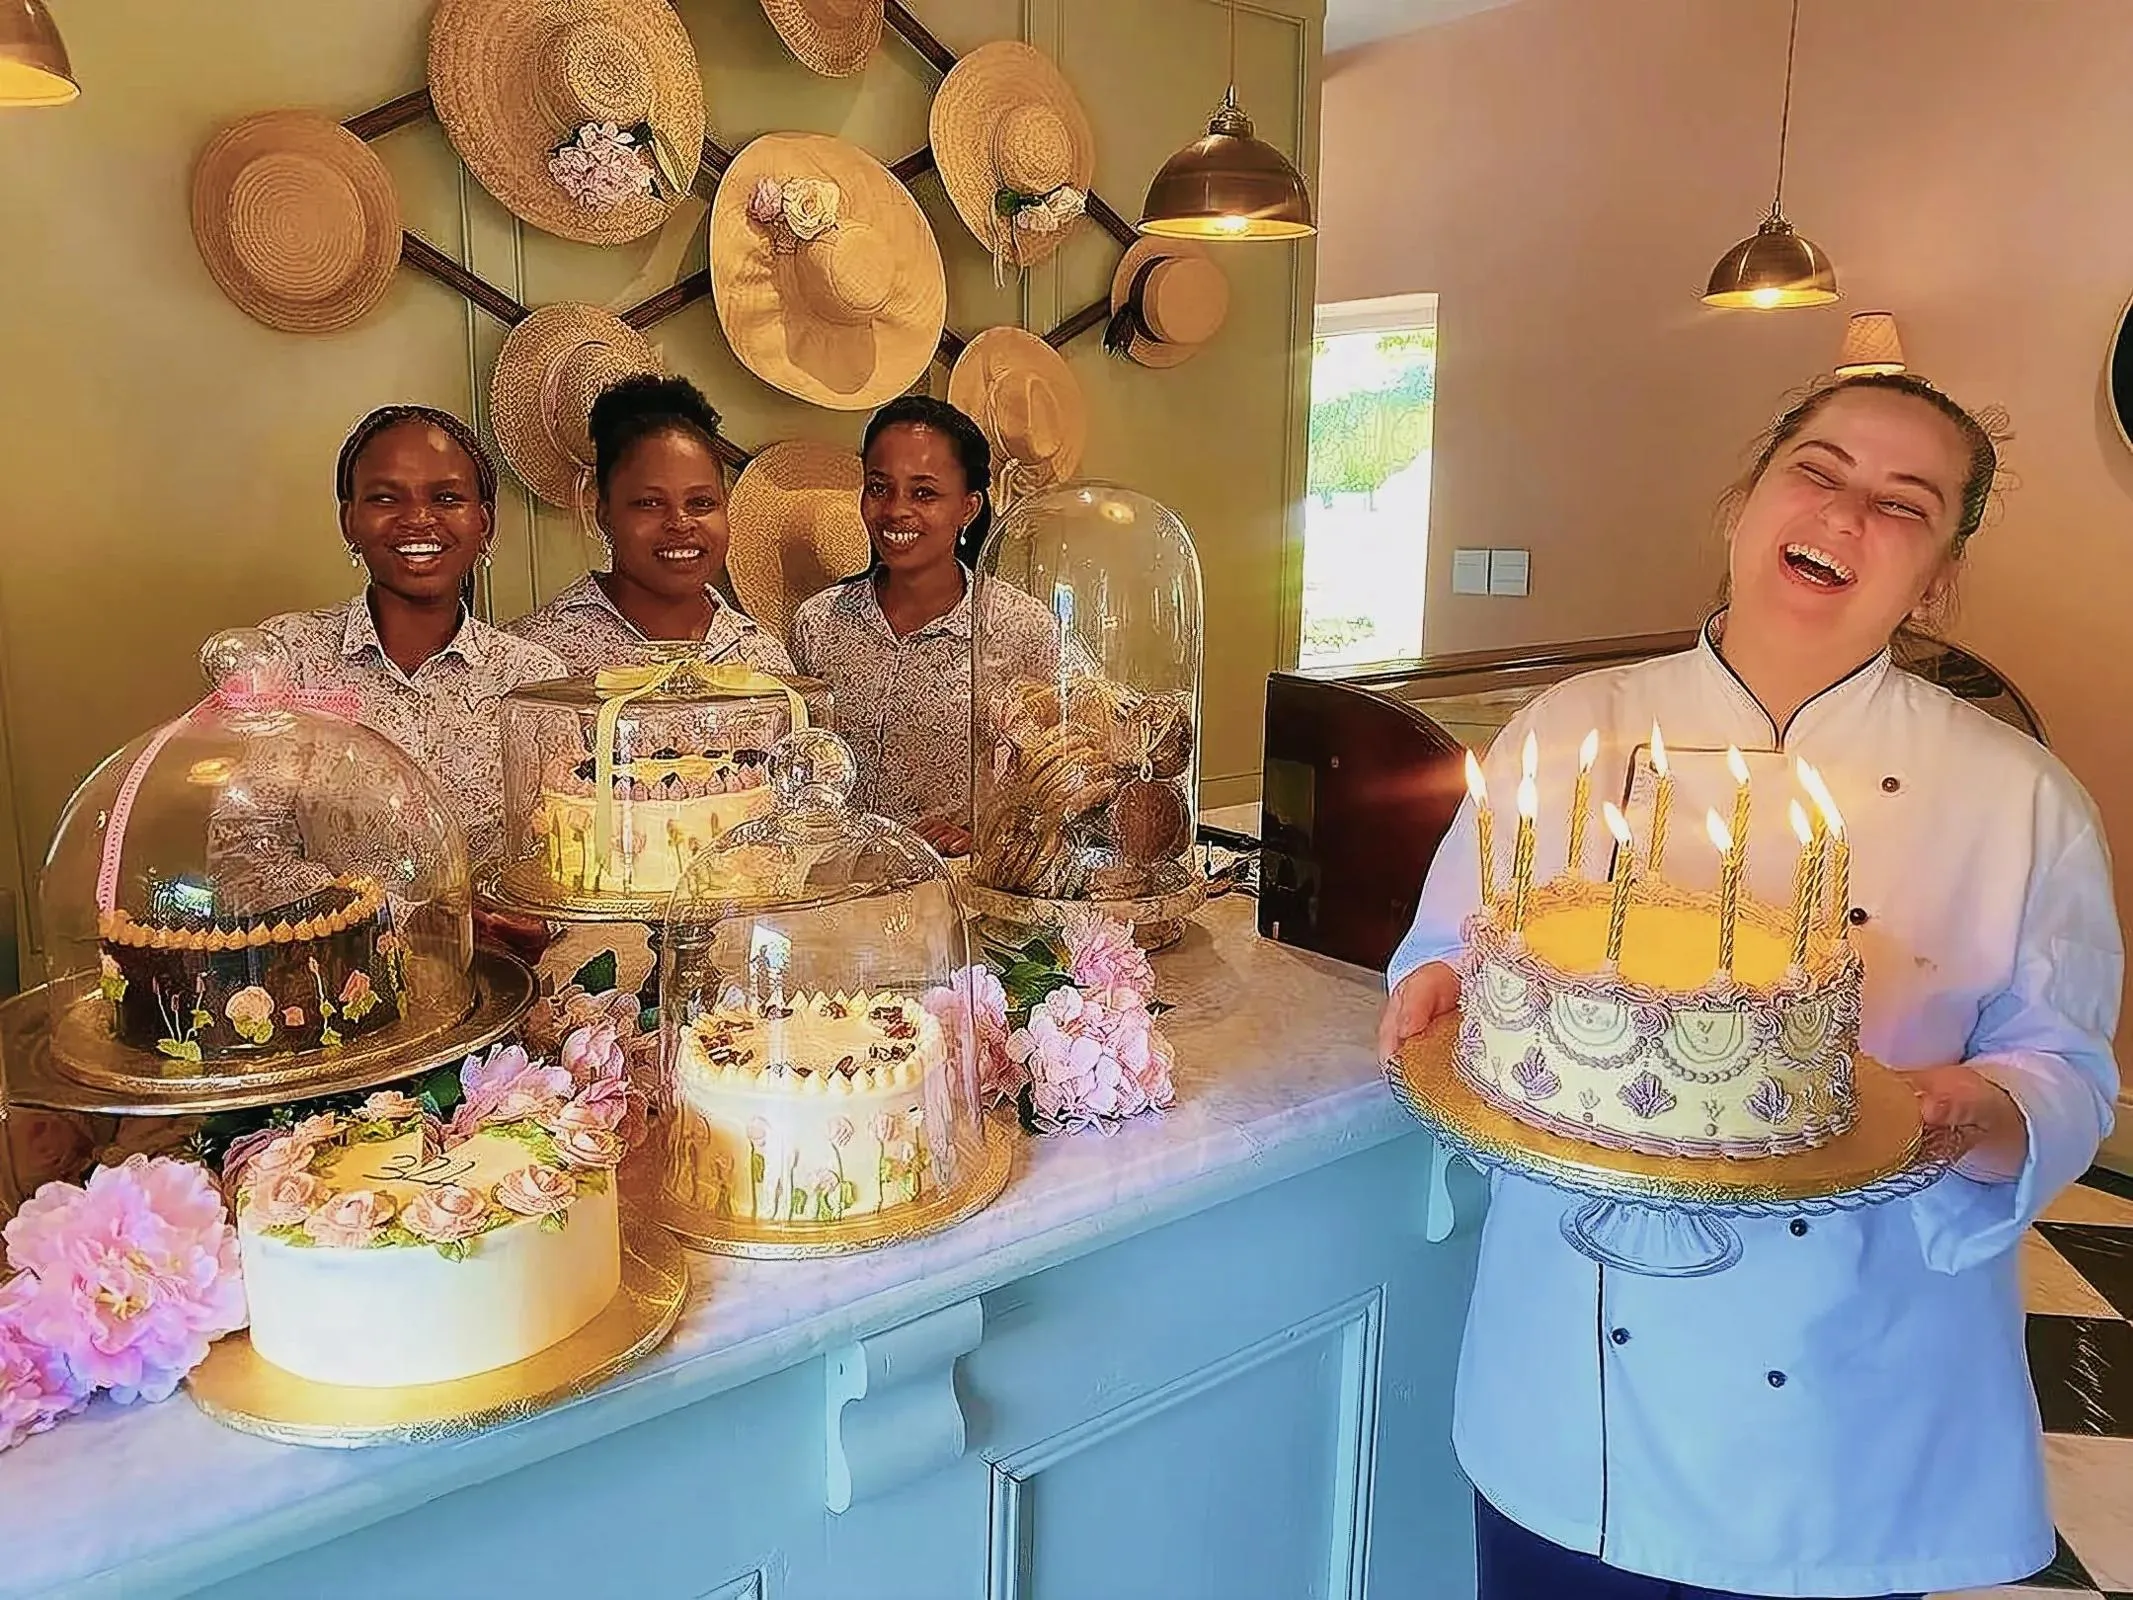 Four women celebrating a birthday in a cozy kitchen with cakes and decorations